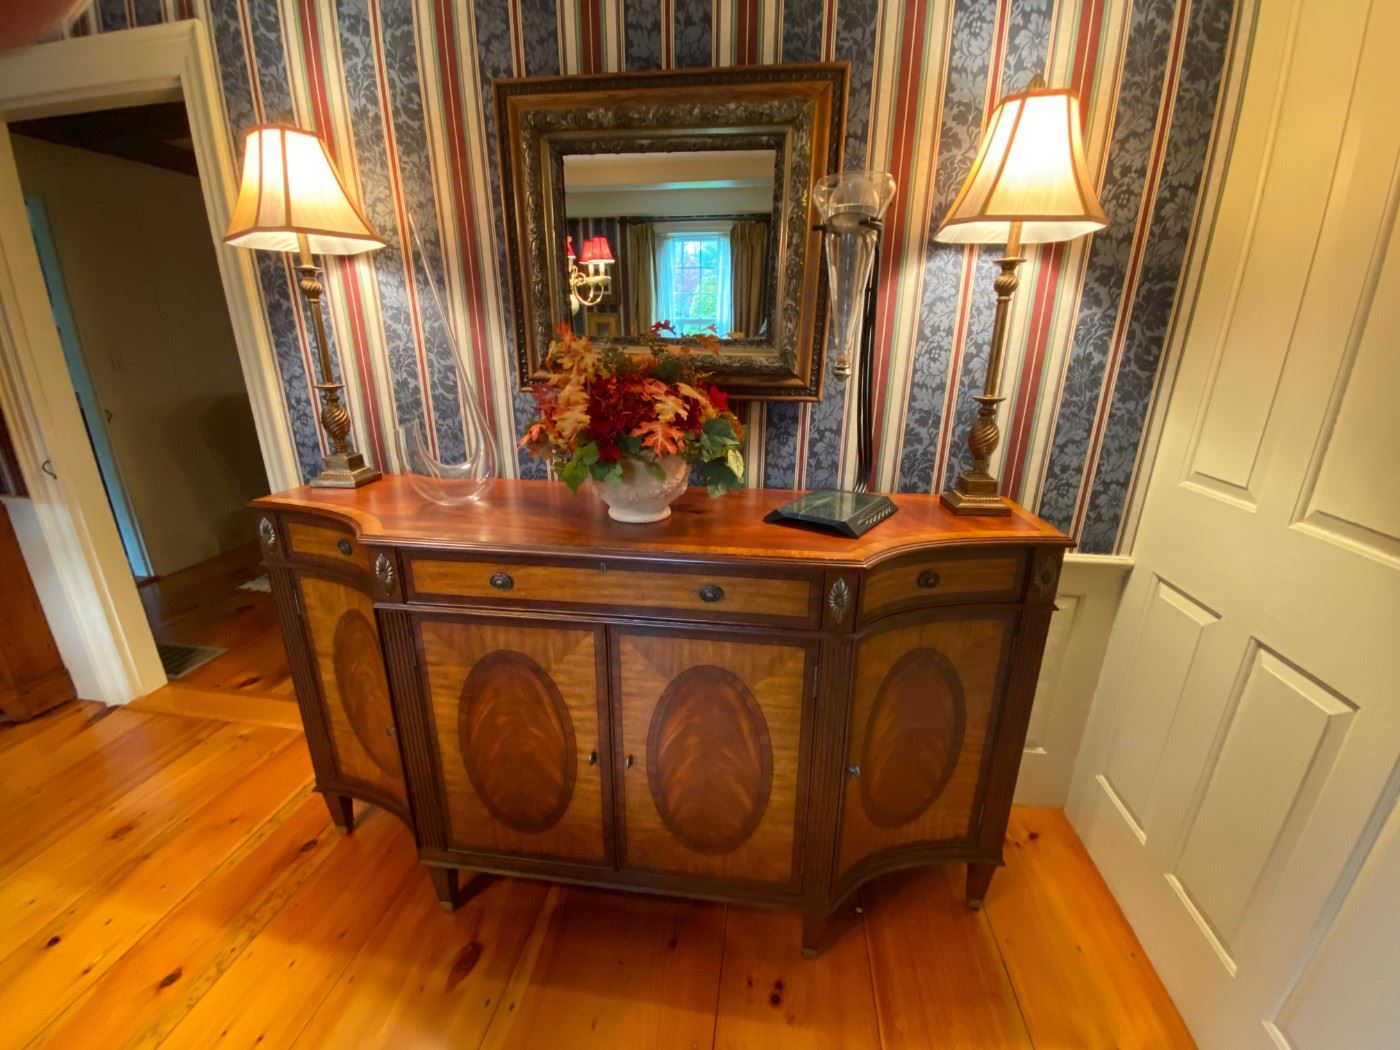 Beautiful inlaid sideboard is 70" long by 20" deep and 39" tall.